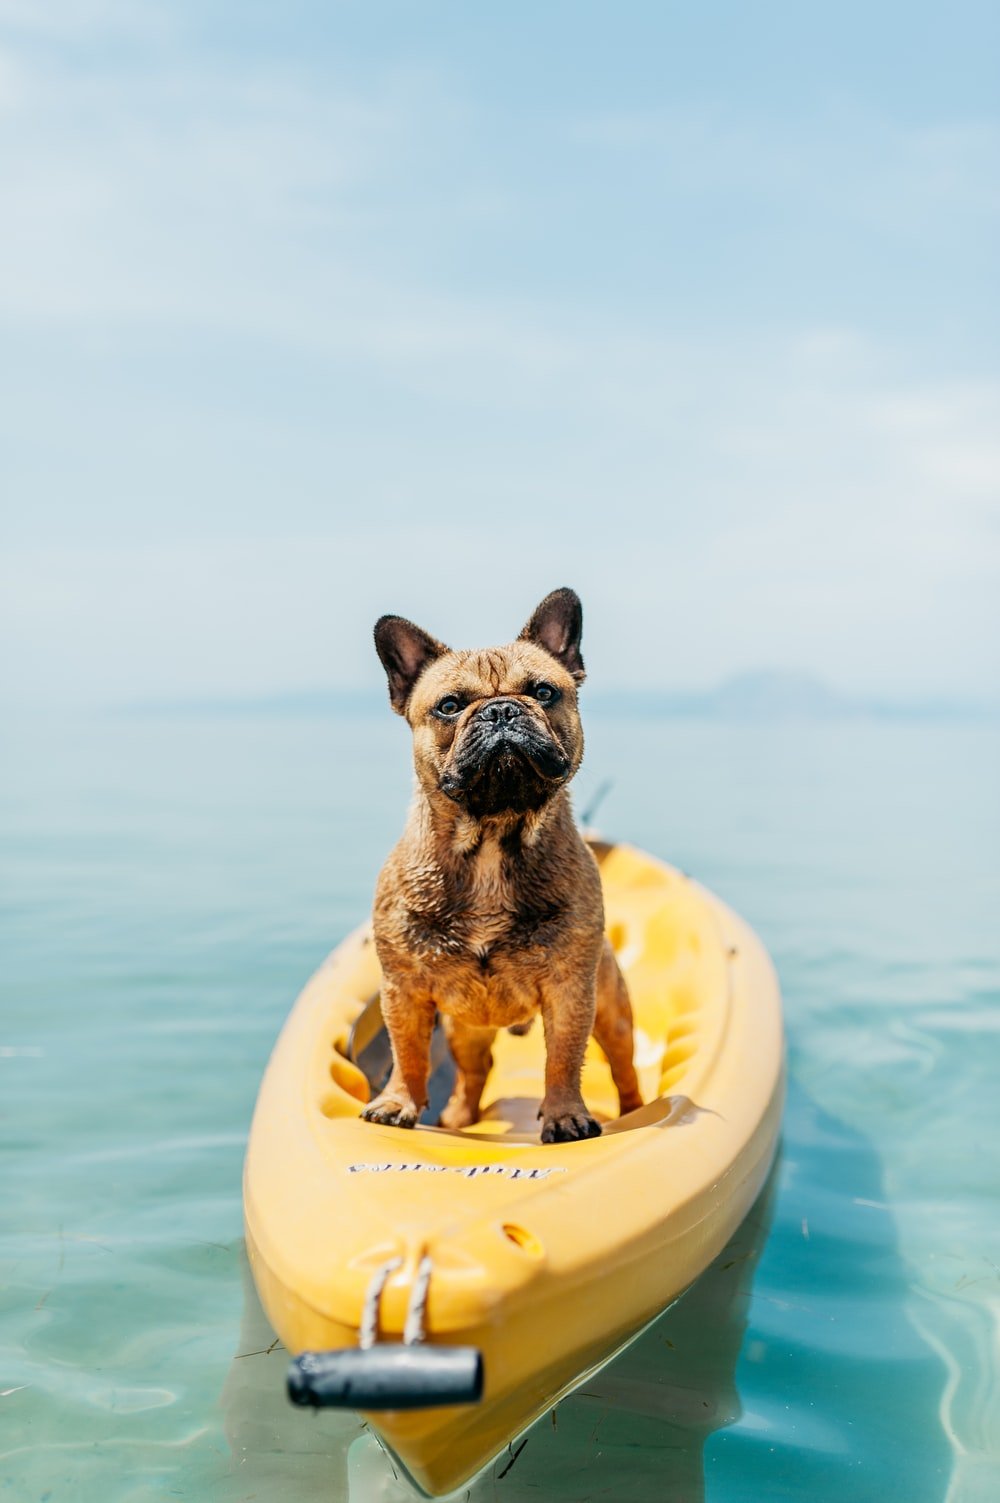 Summer Dog Picture. Download Free Image